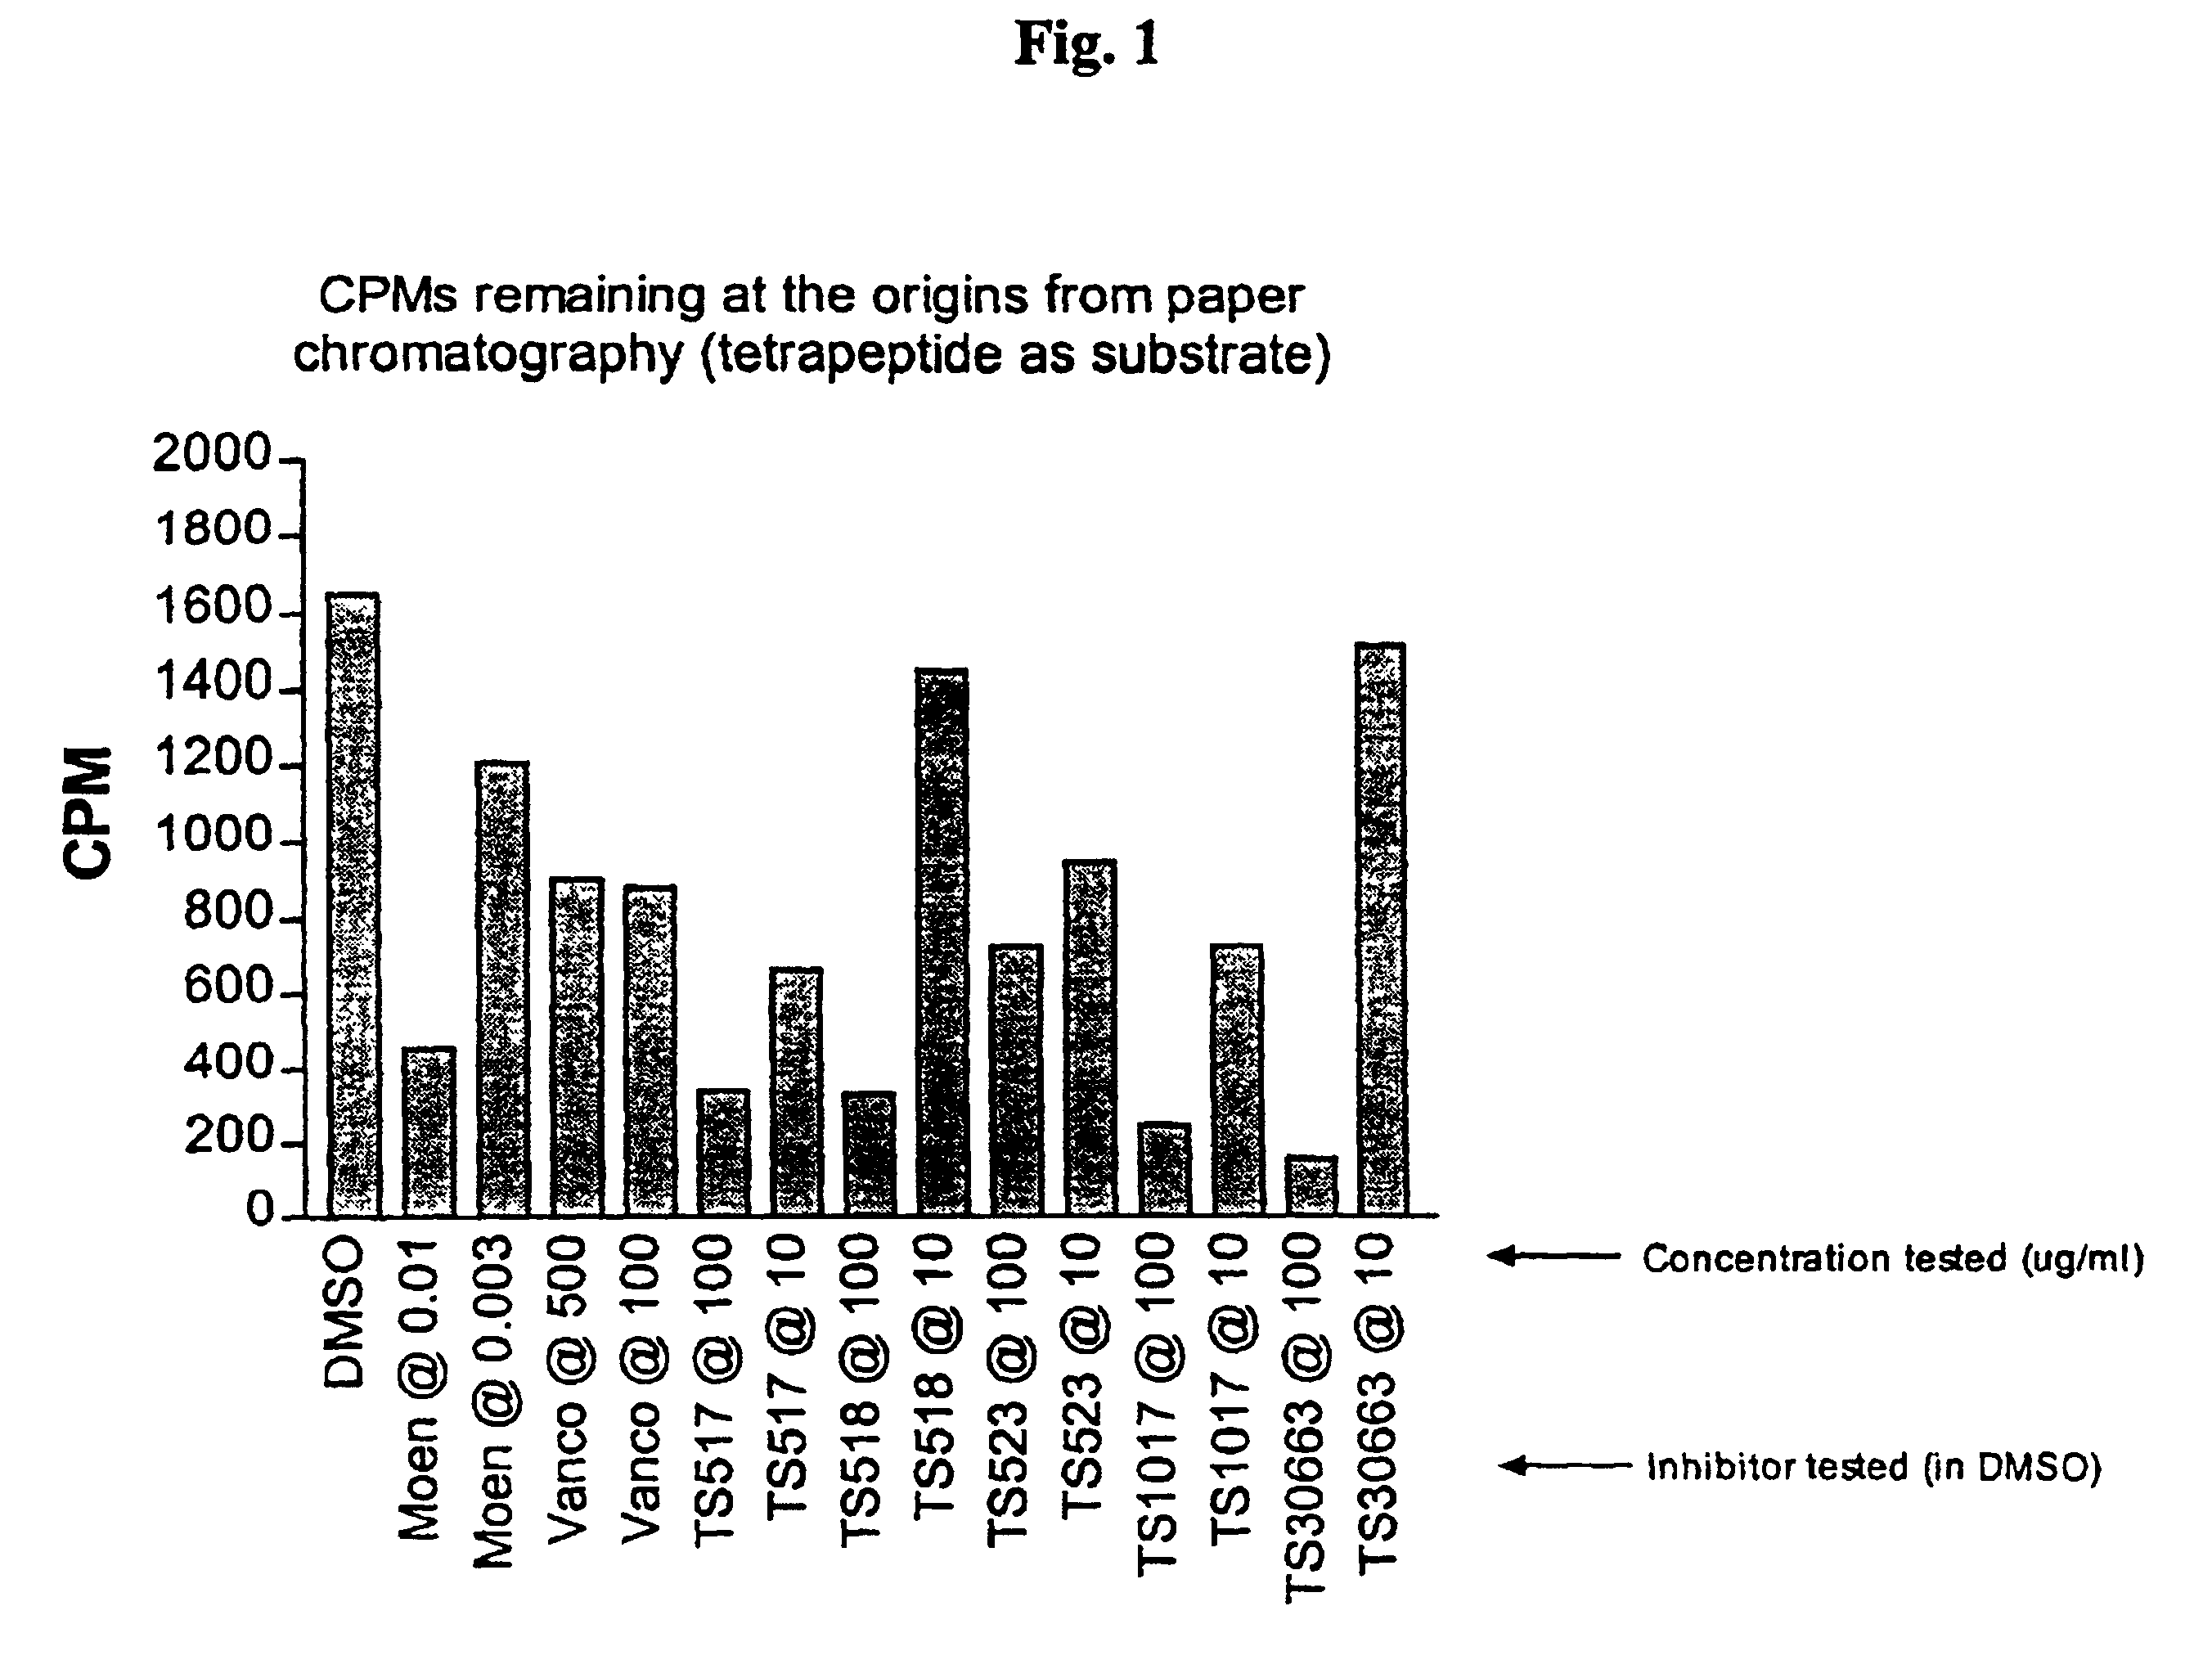 Methods for assaying transglycosylase reactions, and for identifying inhibitors thereof